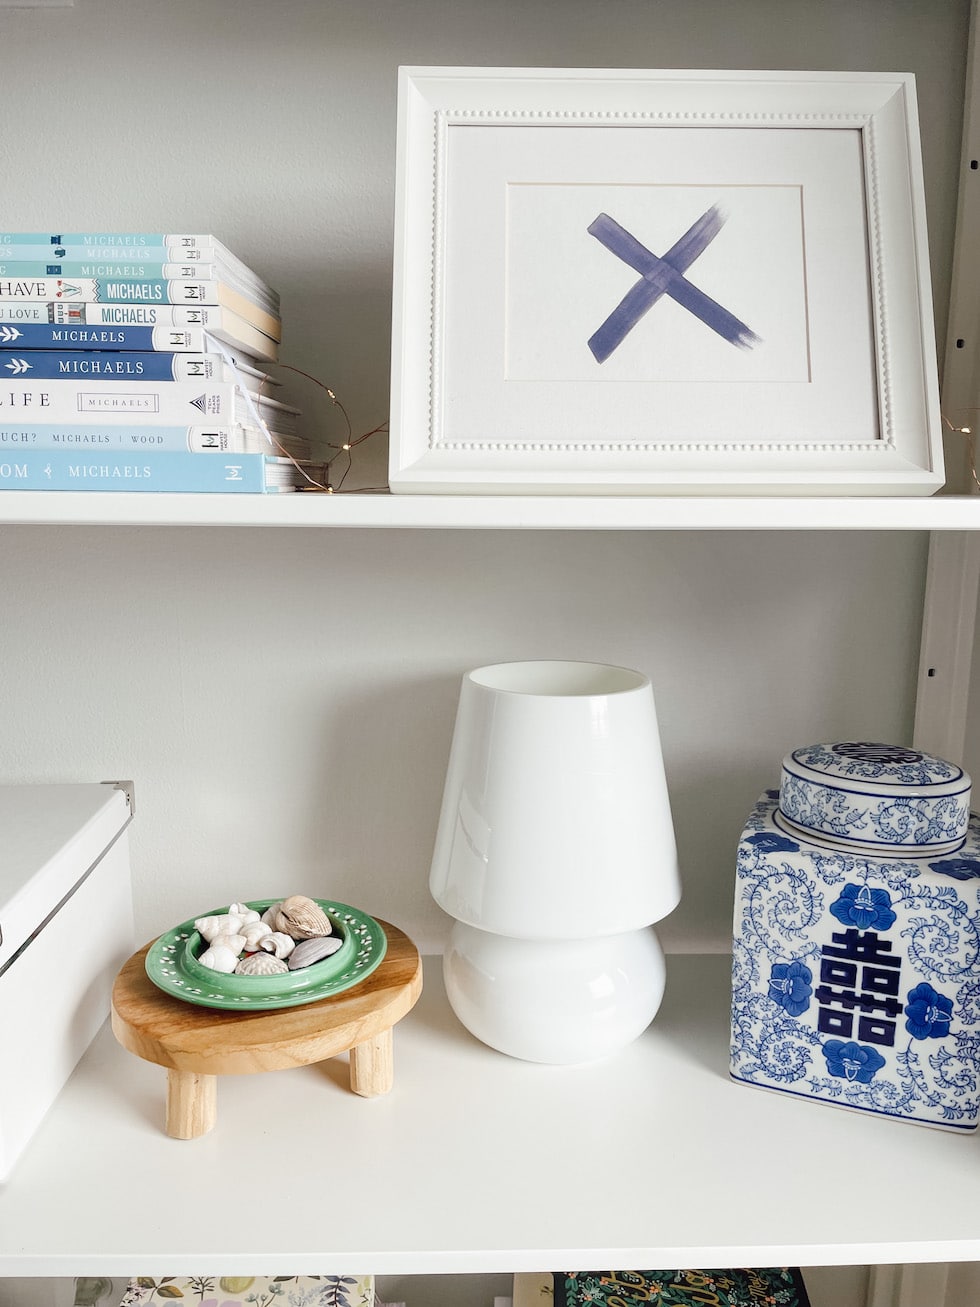 The Perfect Small Lamp for a Bookshelf or Countertop